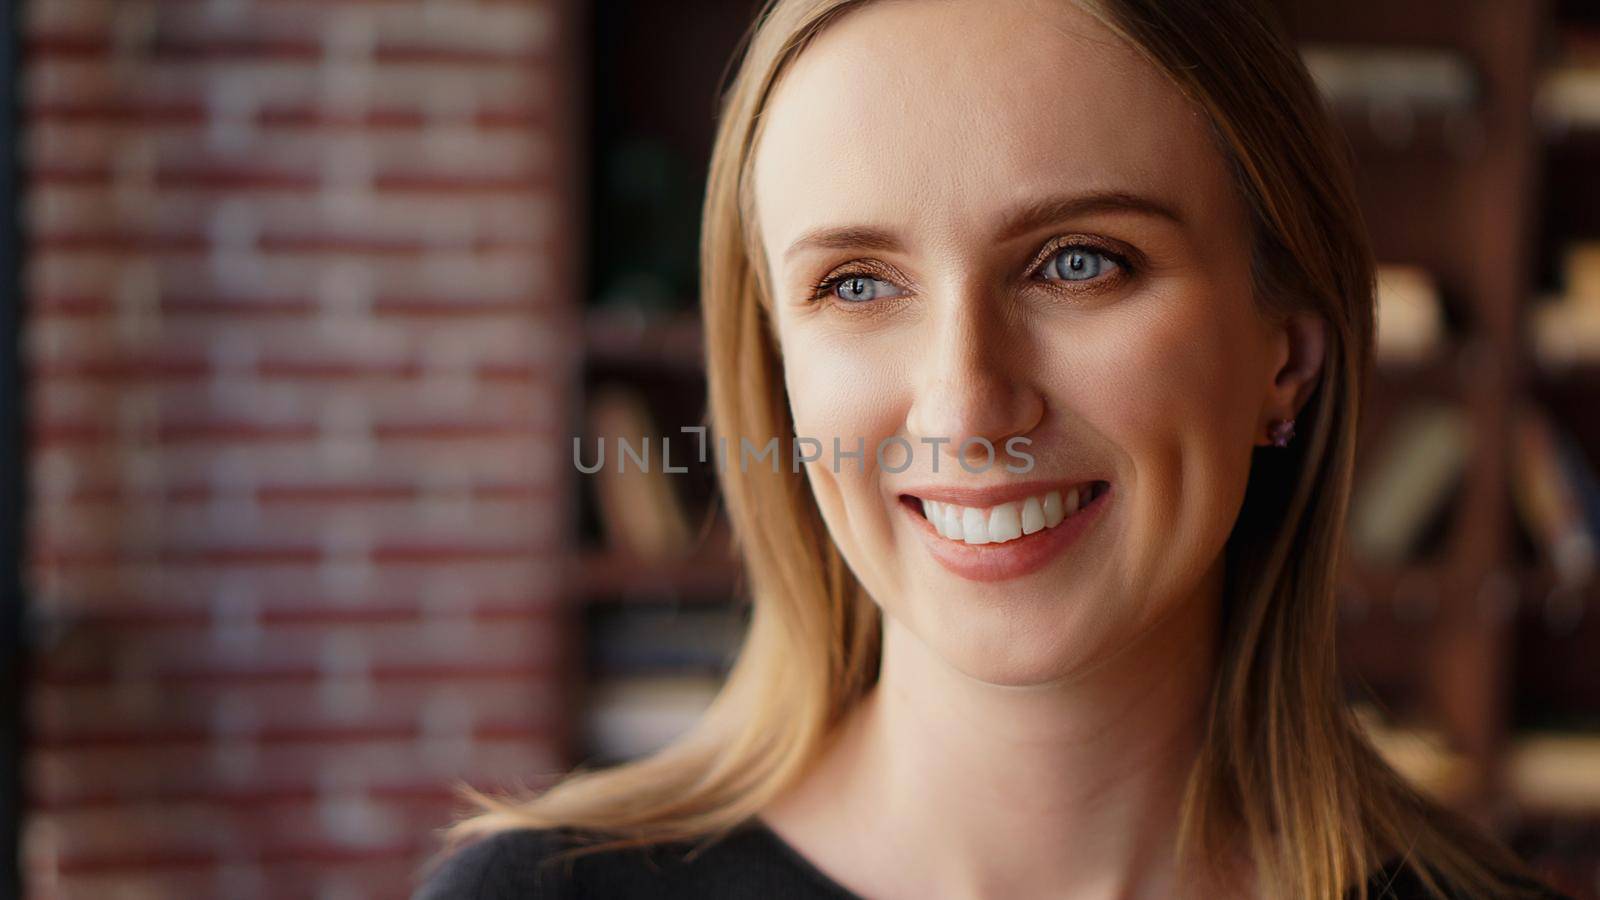 Happy woman in loft office background. Successful and happiness concept. Portrait of young cheerful woman